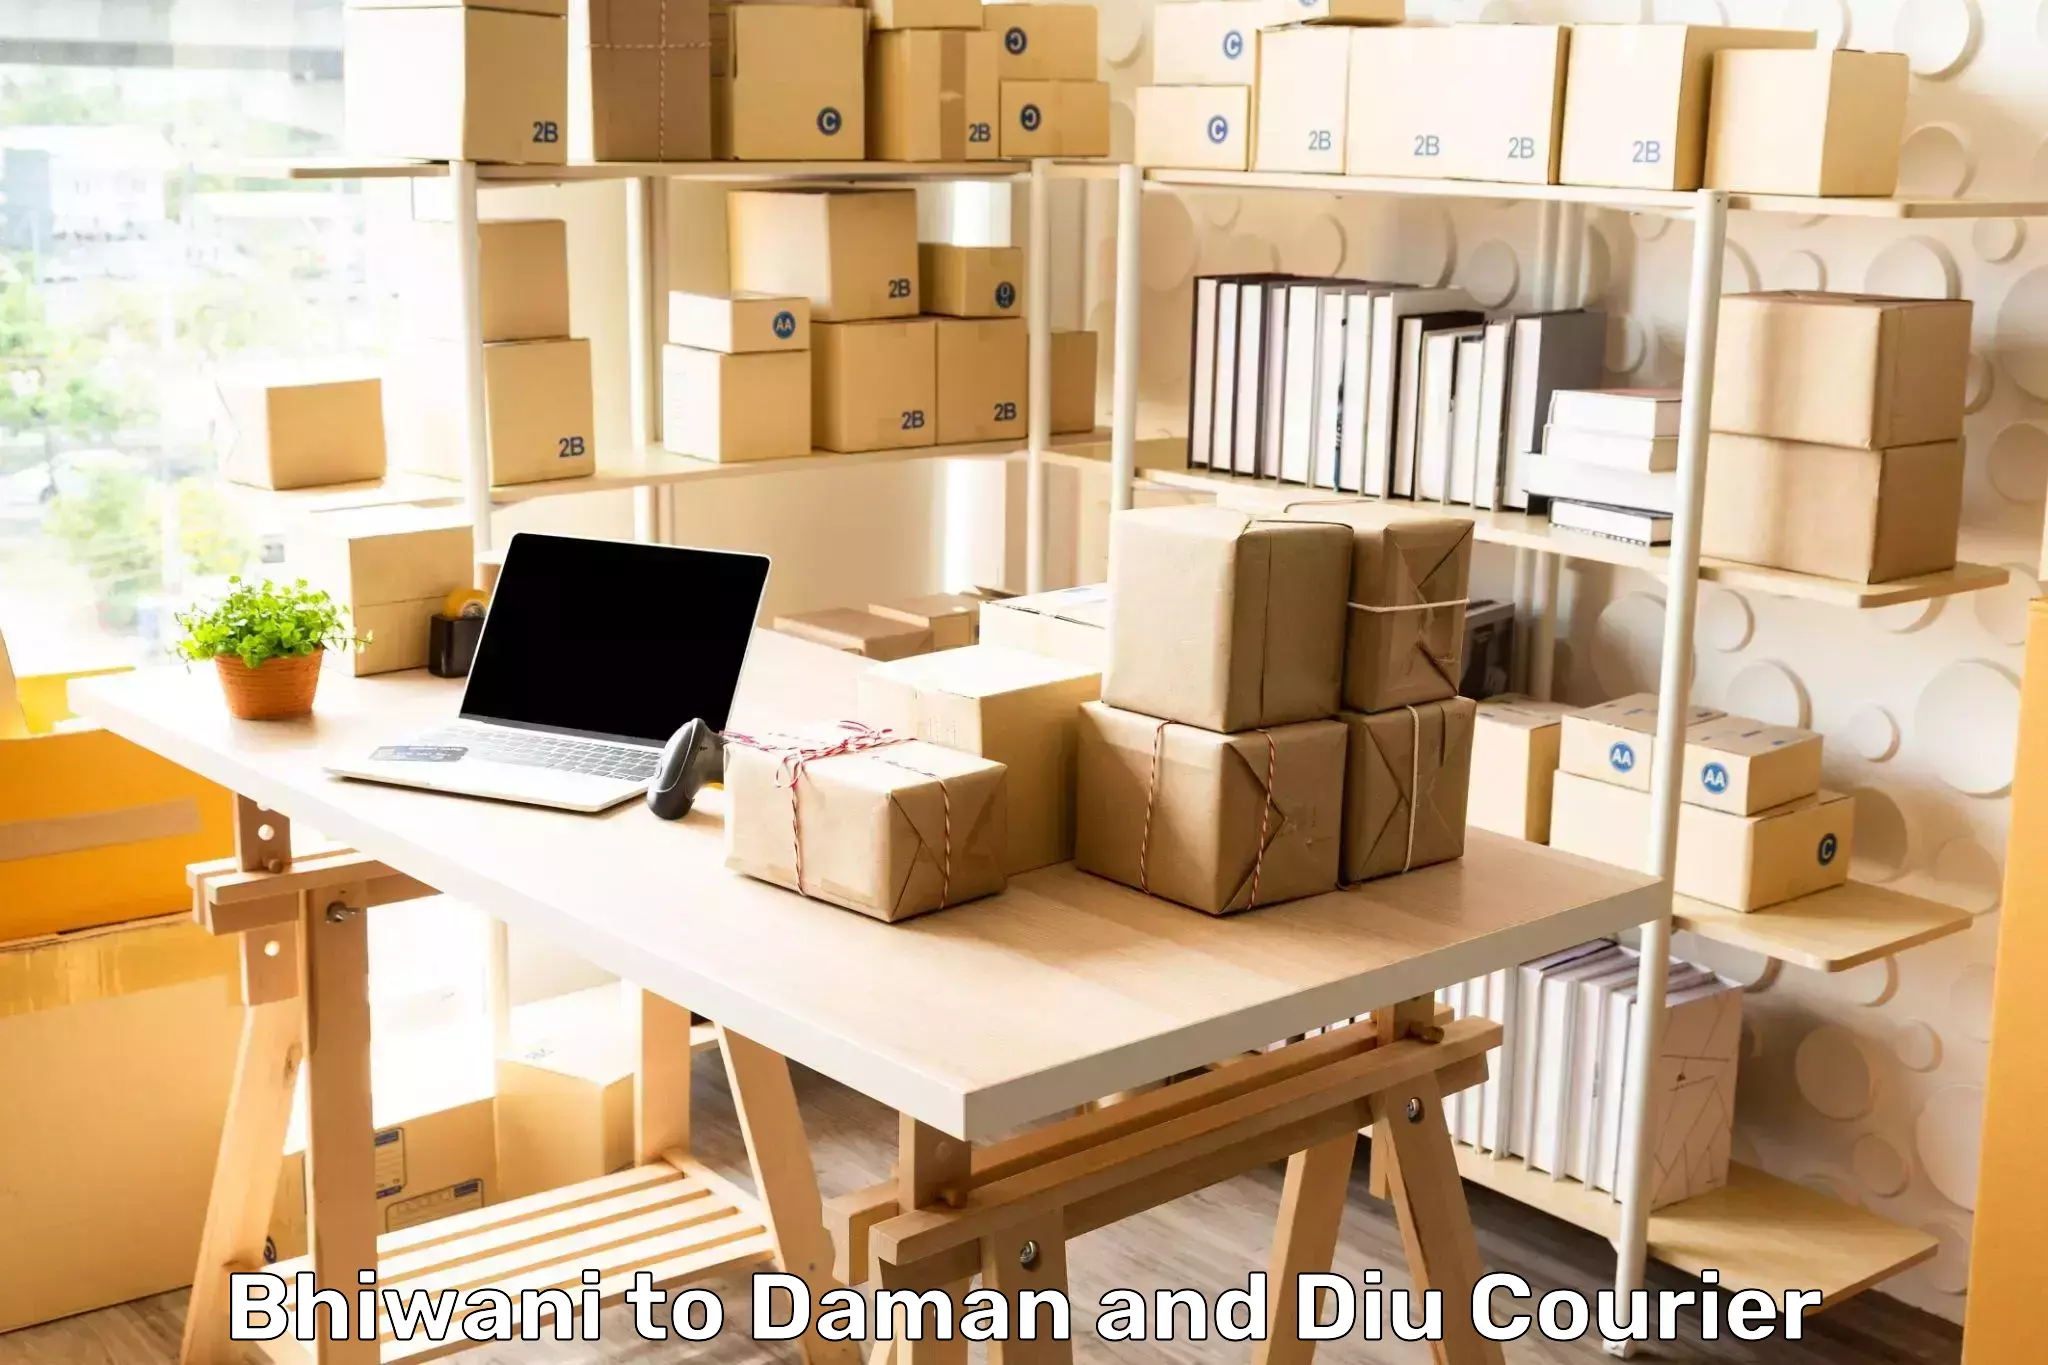 Full-service courier options Bhiwani to Daman and Diu